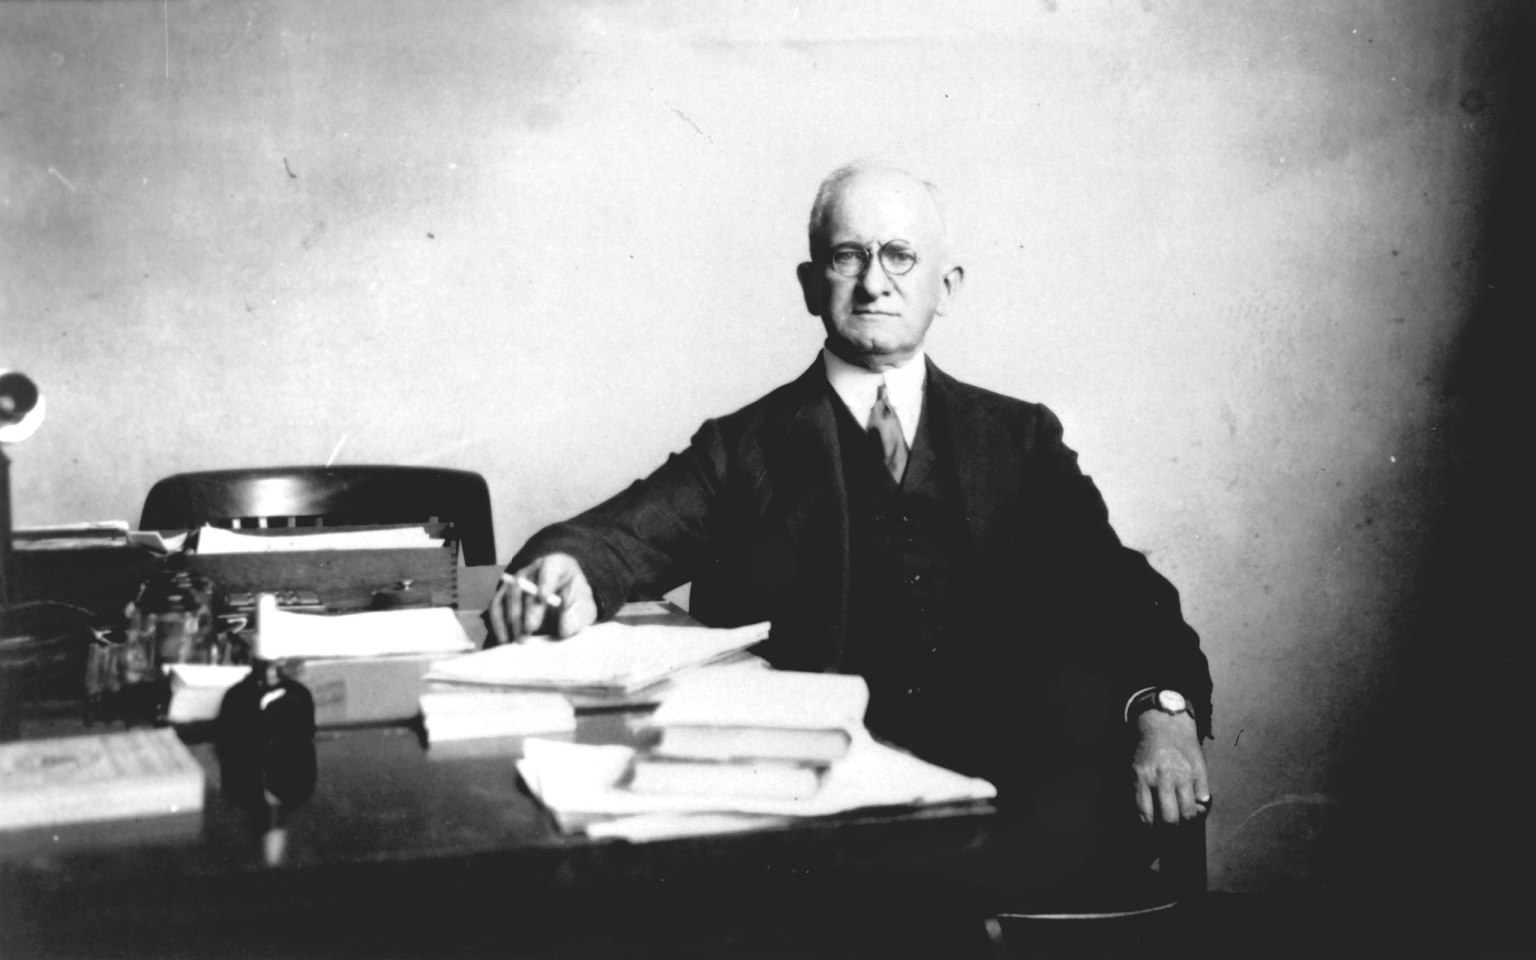 Dr. Joseph Sweetman Ames at his desk at the NACA headquarters. Dr. Ames was a founding member of NACA (National Advisory Committee for Aeronautics), appointed by President Woodrow Wilson in 1915. Ames took on NACA's most challenging assignments but mostly represented physics.